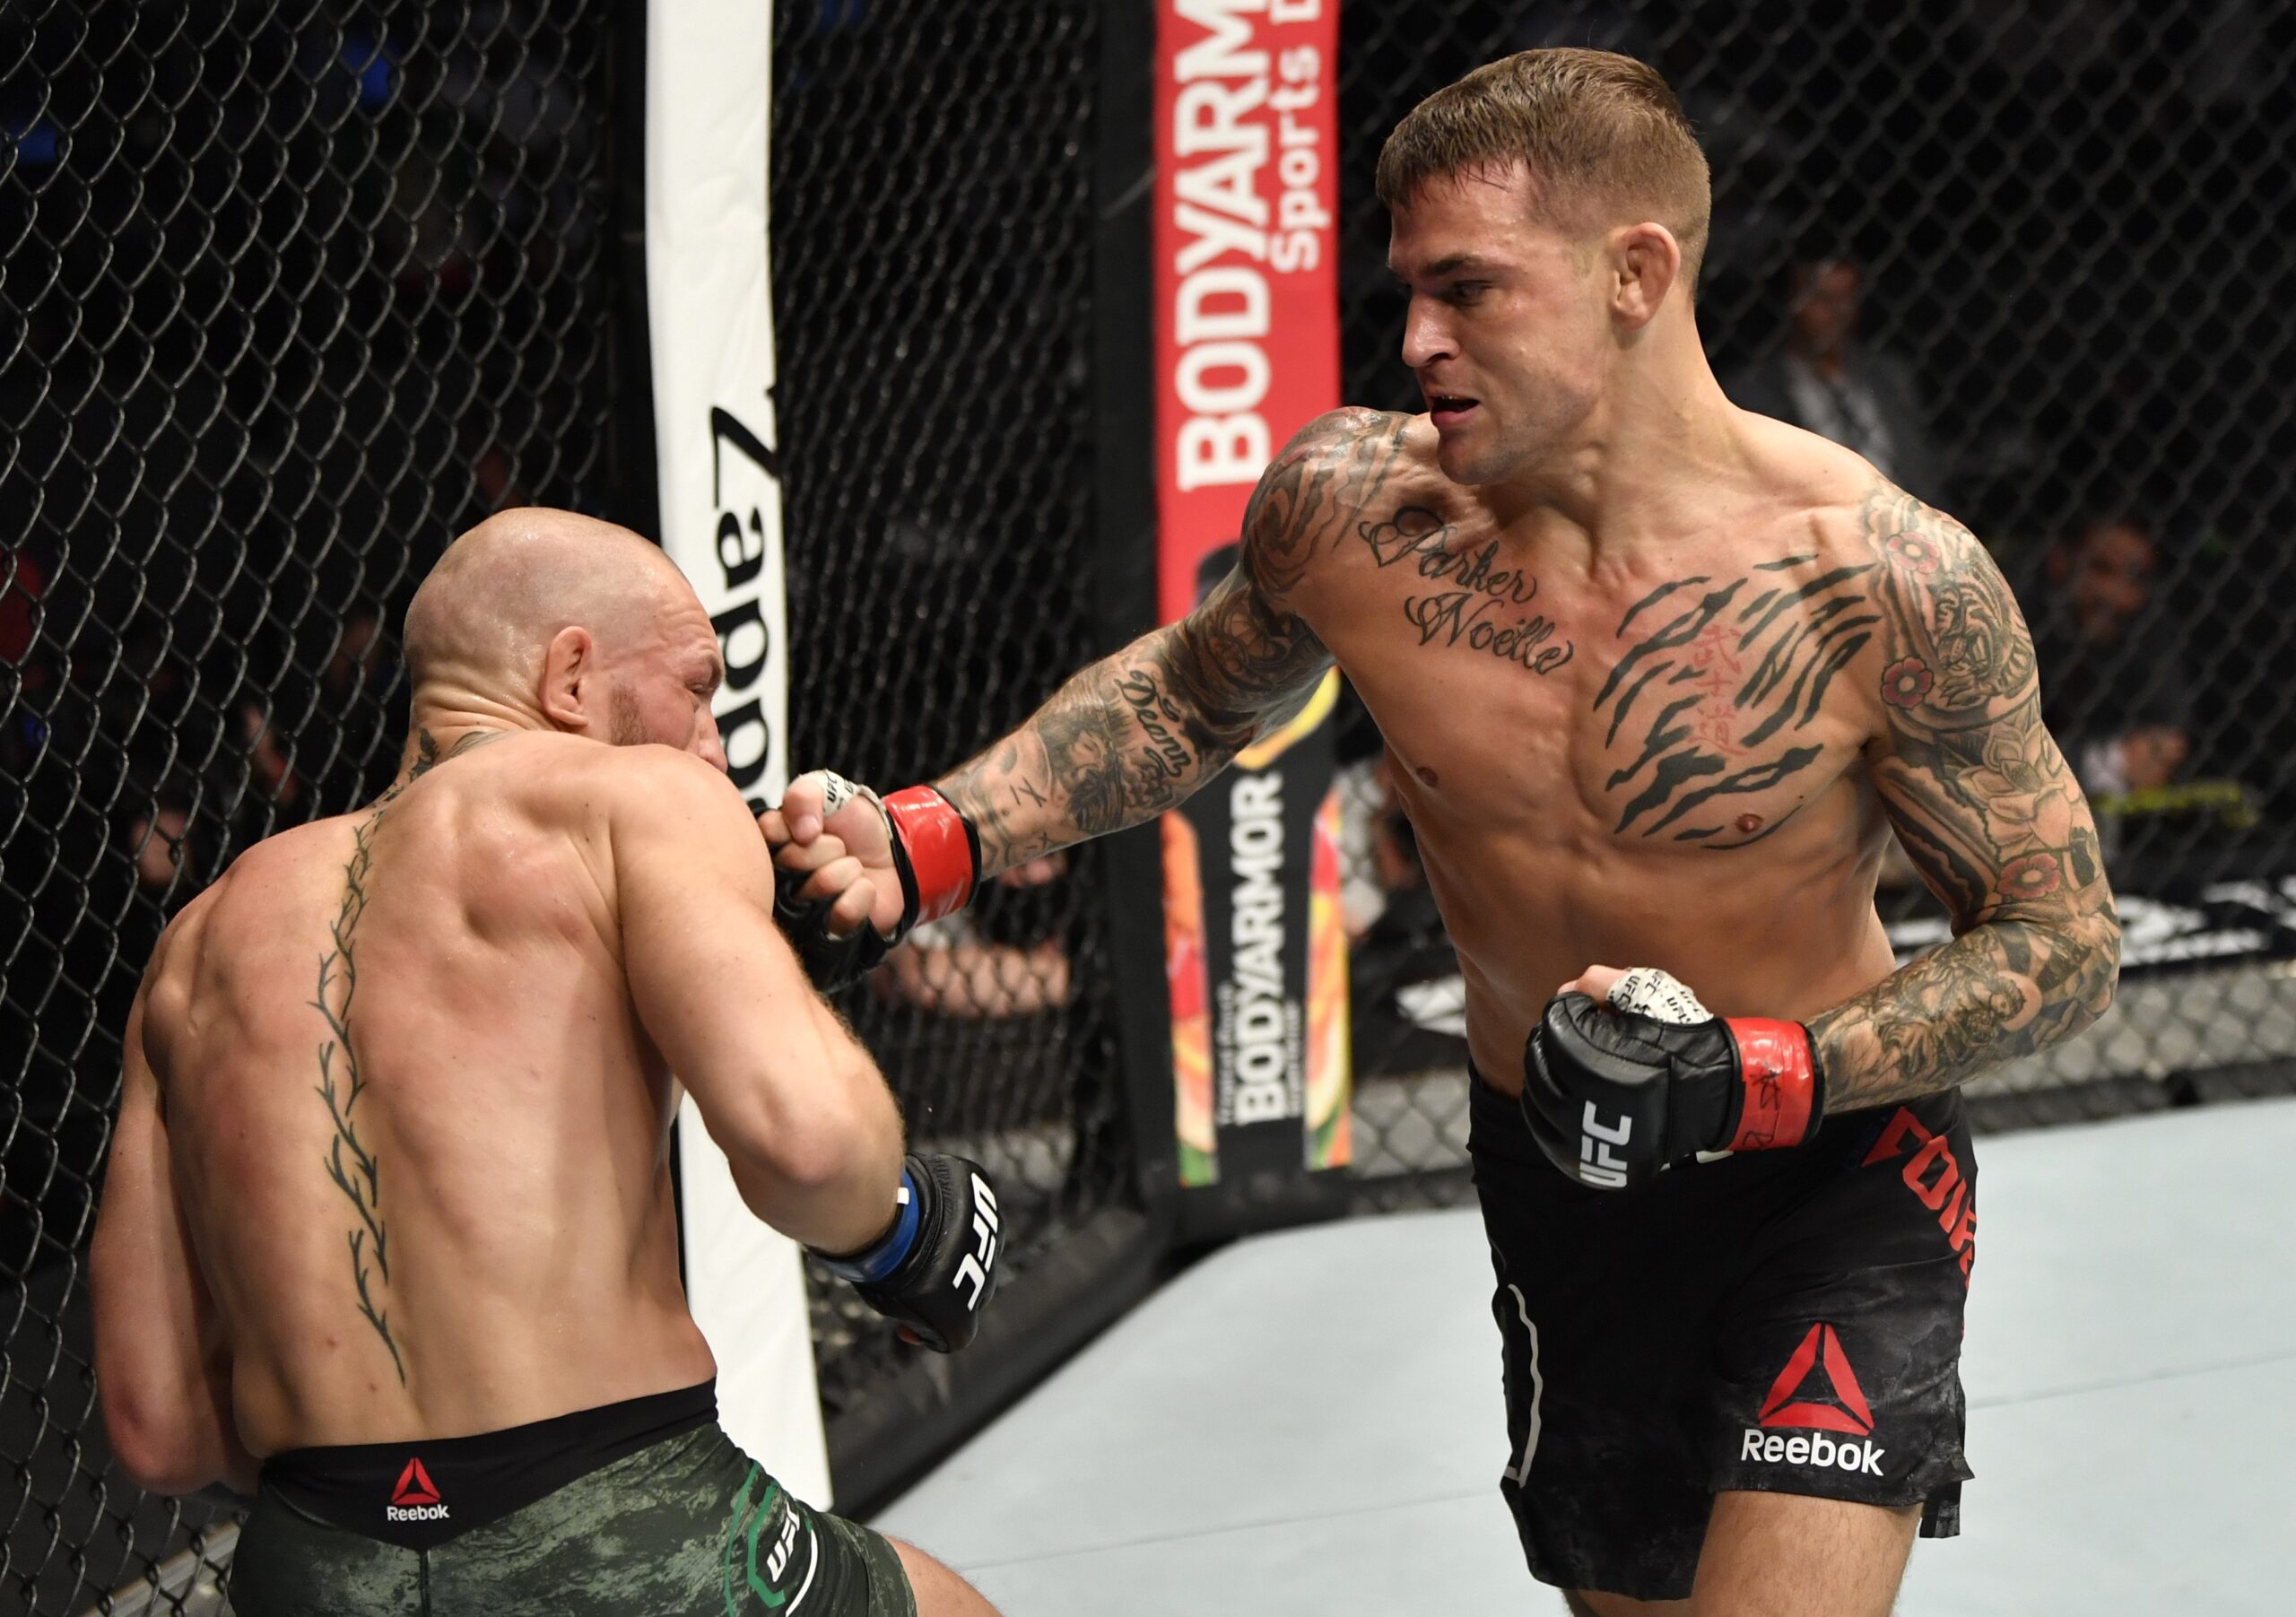 Conor McGregor Gets Knocked Out by Dustin Poirier at UFC 257